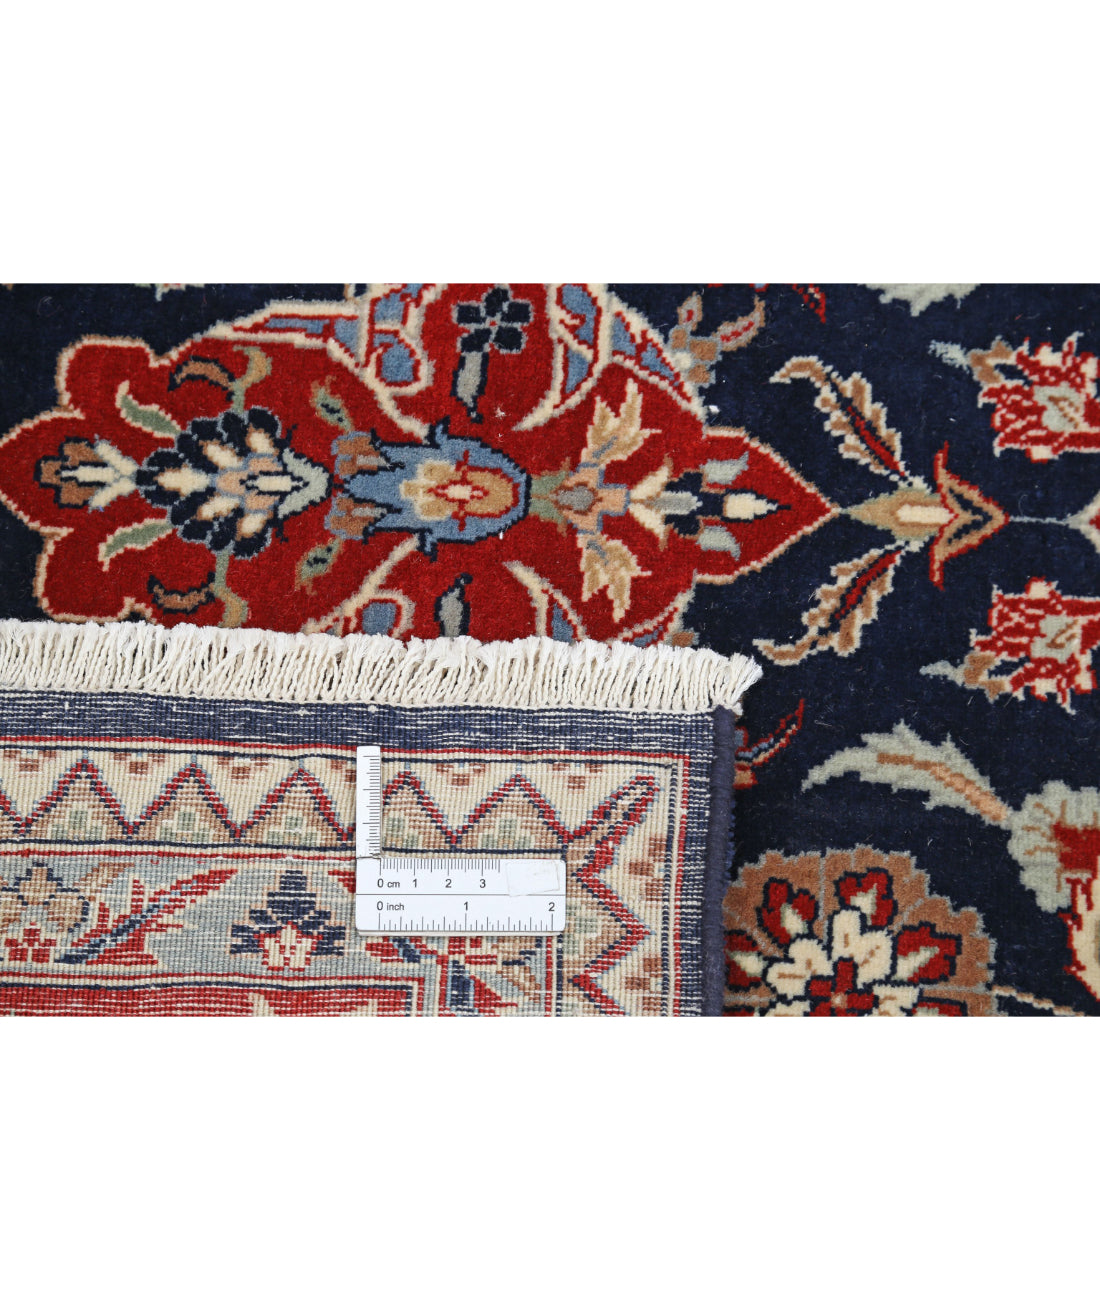 Heritage 6'0'' X 9'0'' Hand-Knotted Wool Rug 6'0'' x 9'0'' (180 X 270) / Blue / Red